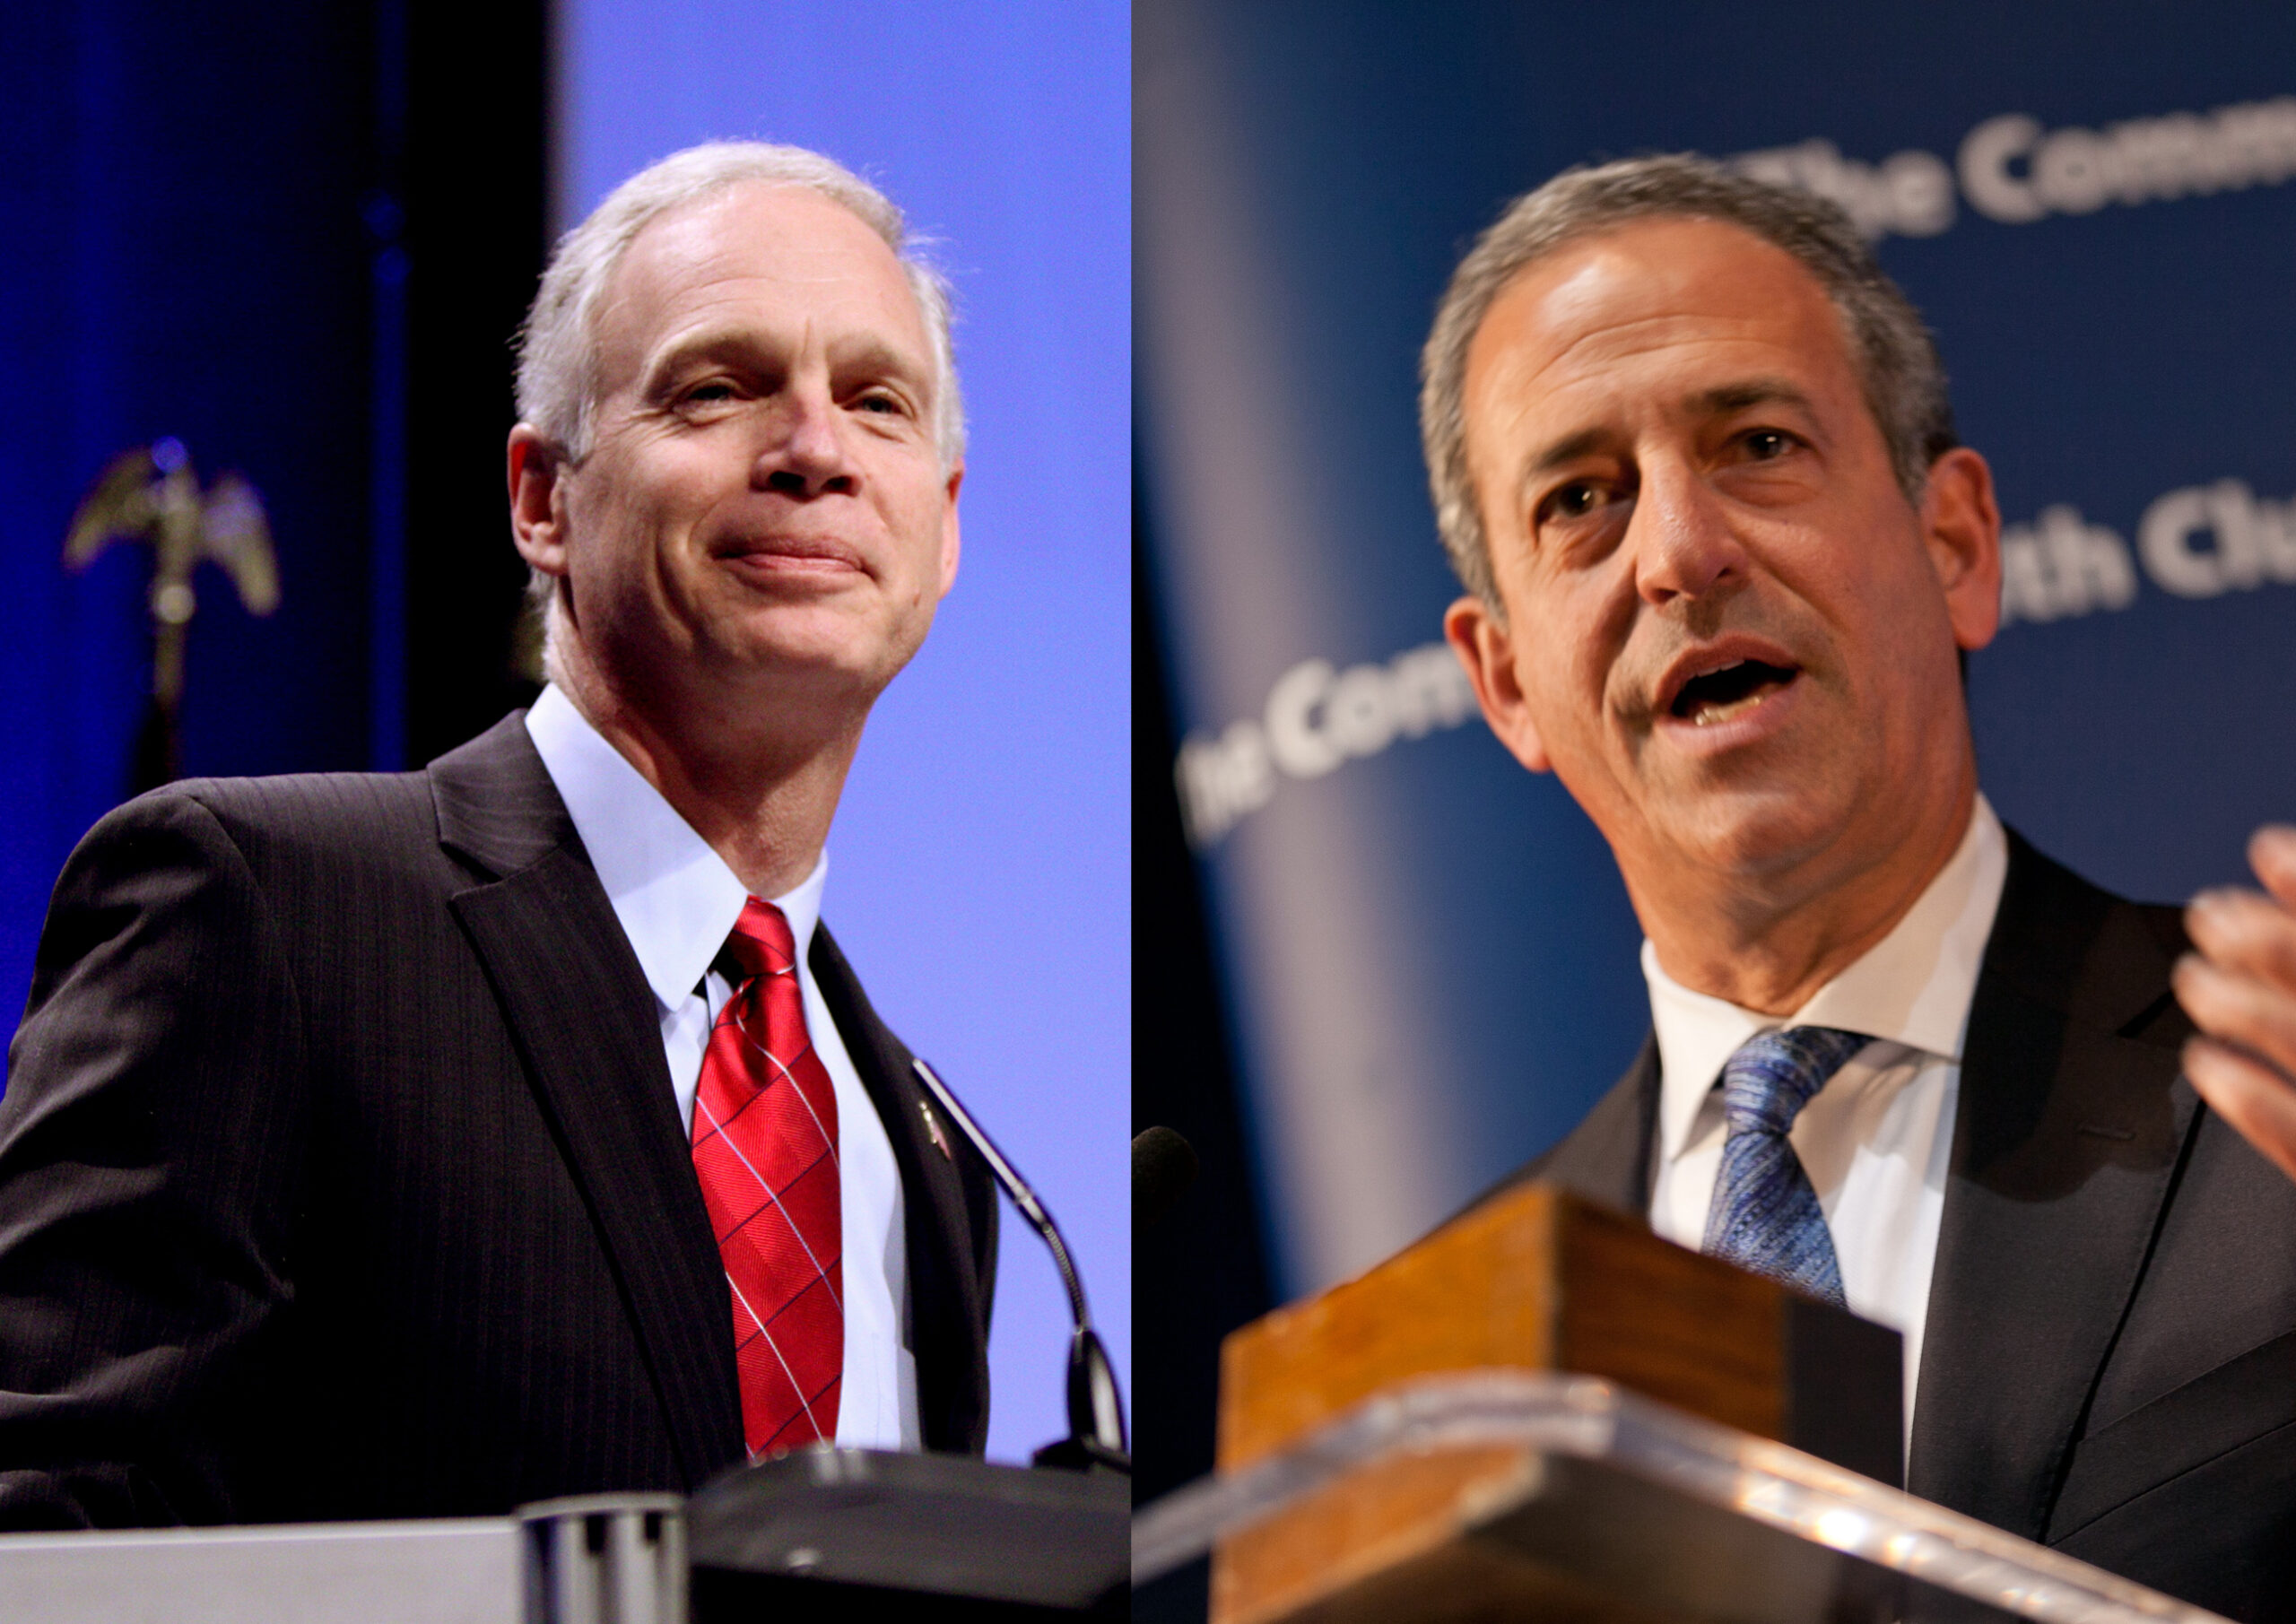 Johnson, Feingold Back Parties In Supreme Court Appointment Fight